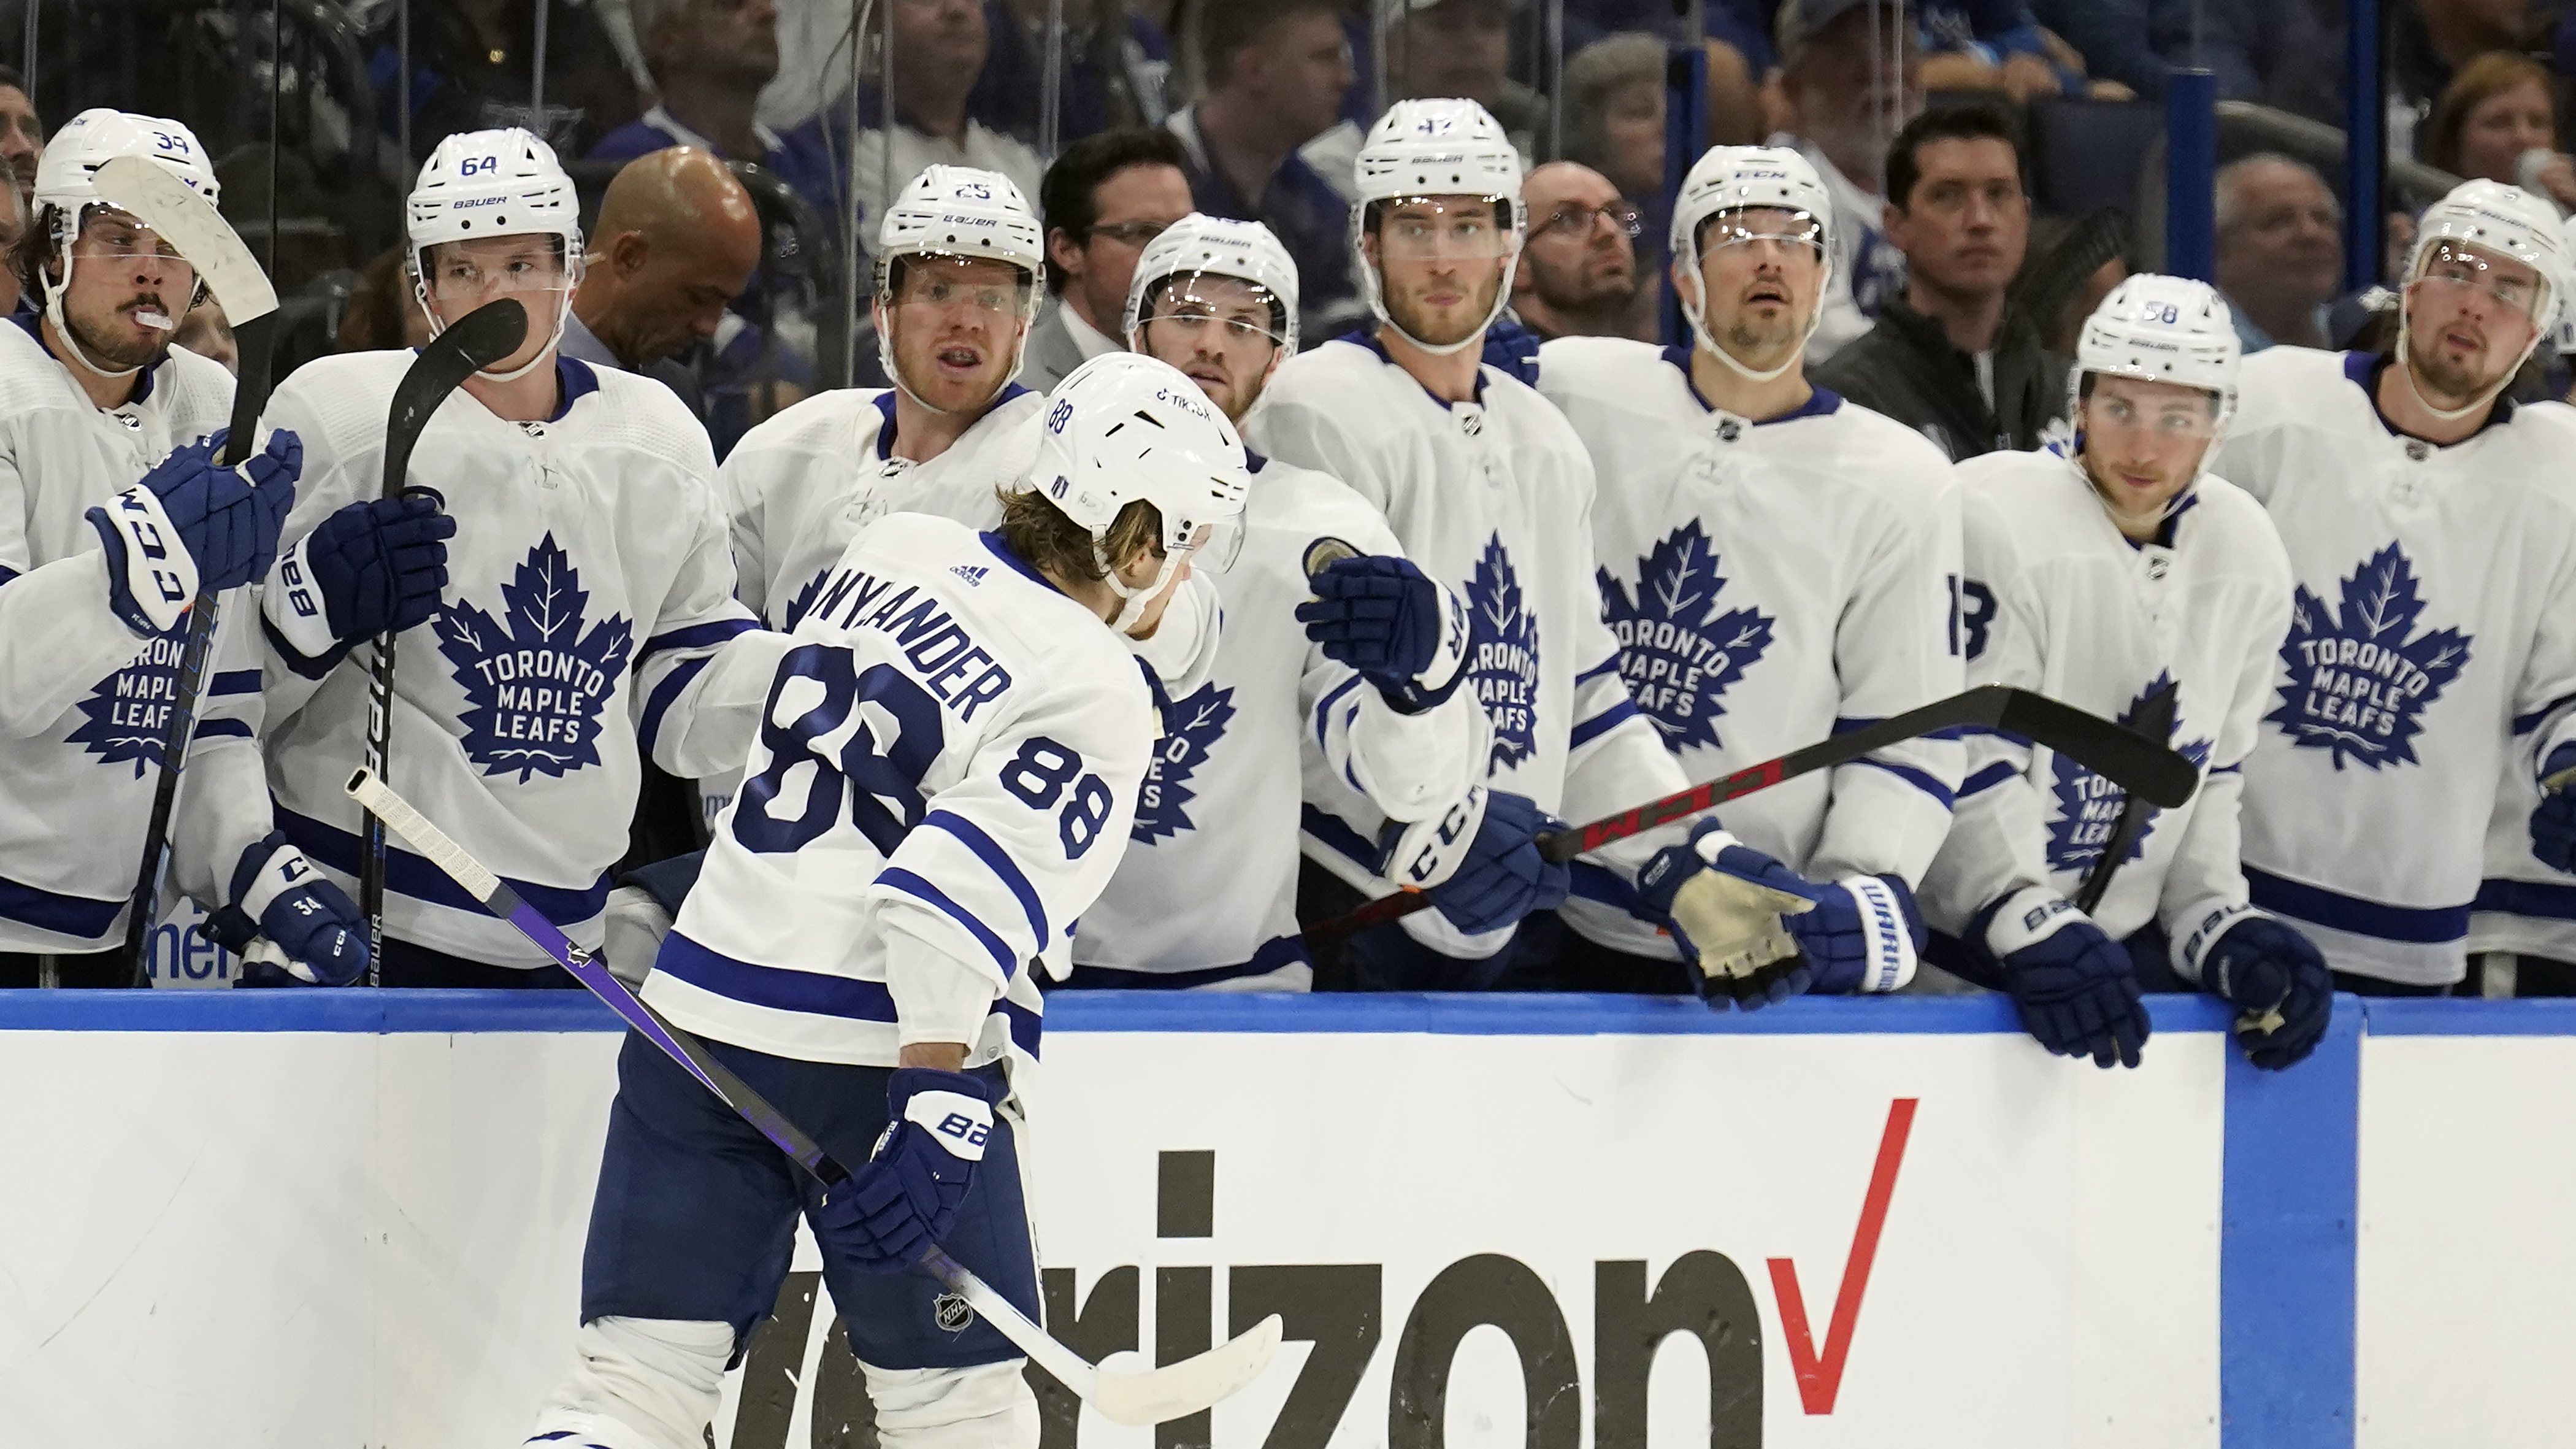 Keefe sticking with same Leafs lineup for Game 5; Bunting won't